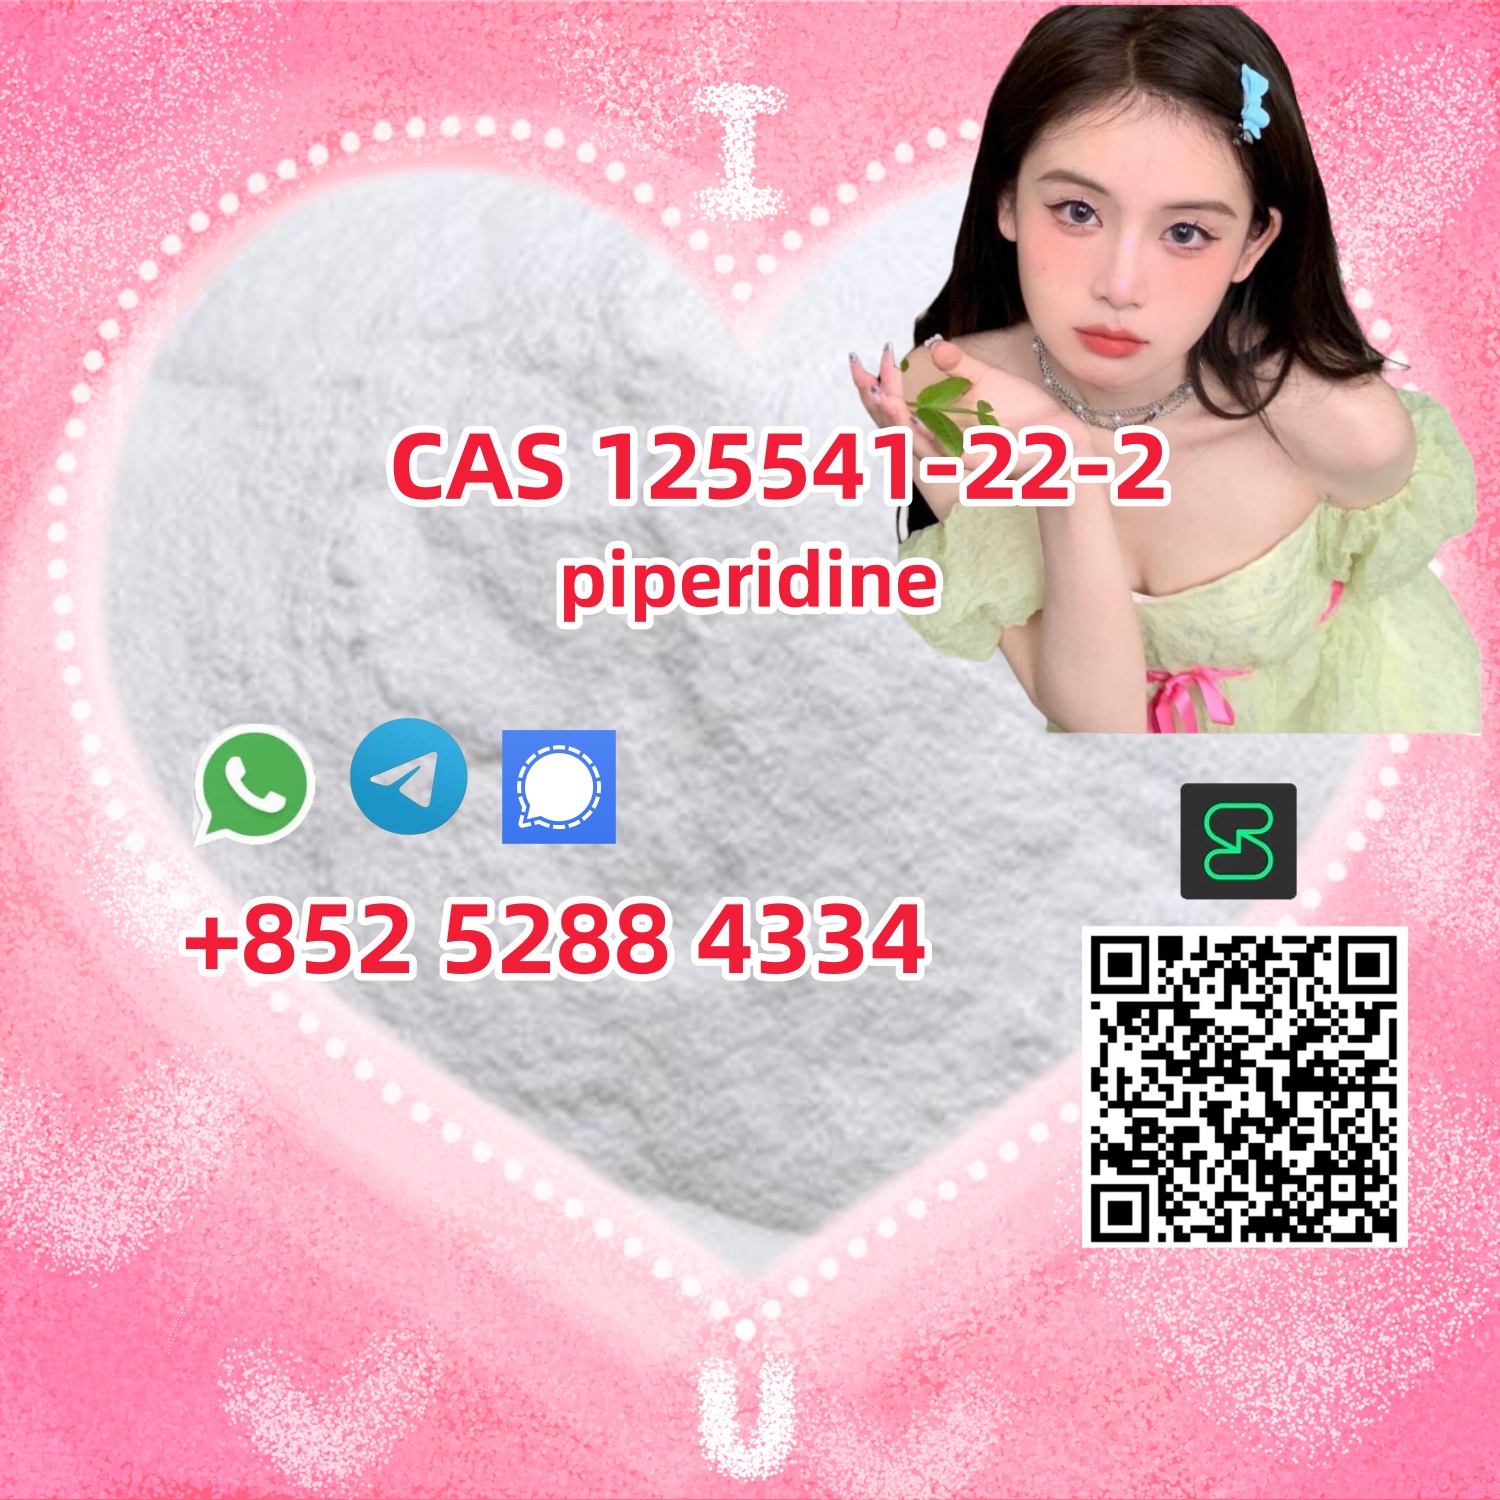 Order piperidine white crystalline powder CAS 125541-22-2,aaaaa,Others,Free Classifieds,Post Free Ads,77traders.com